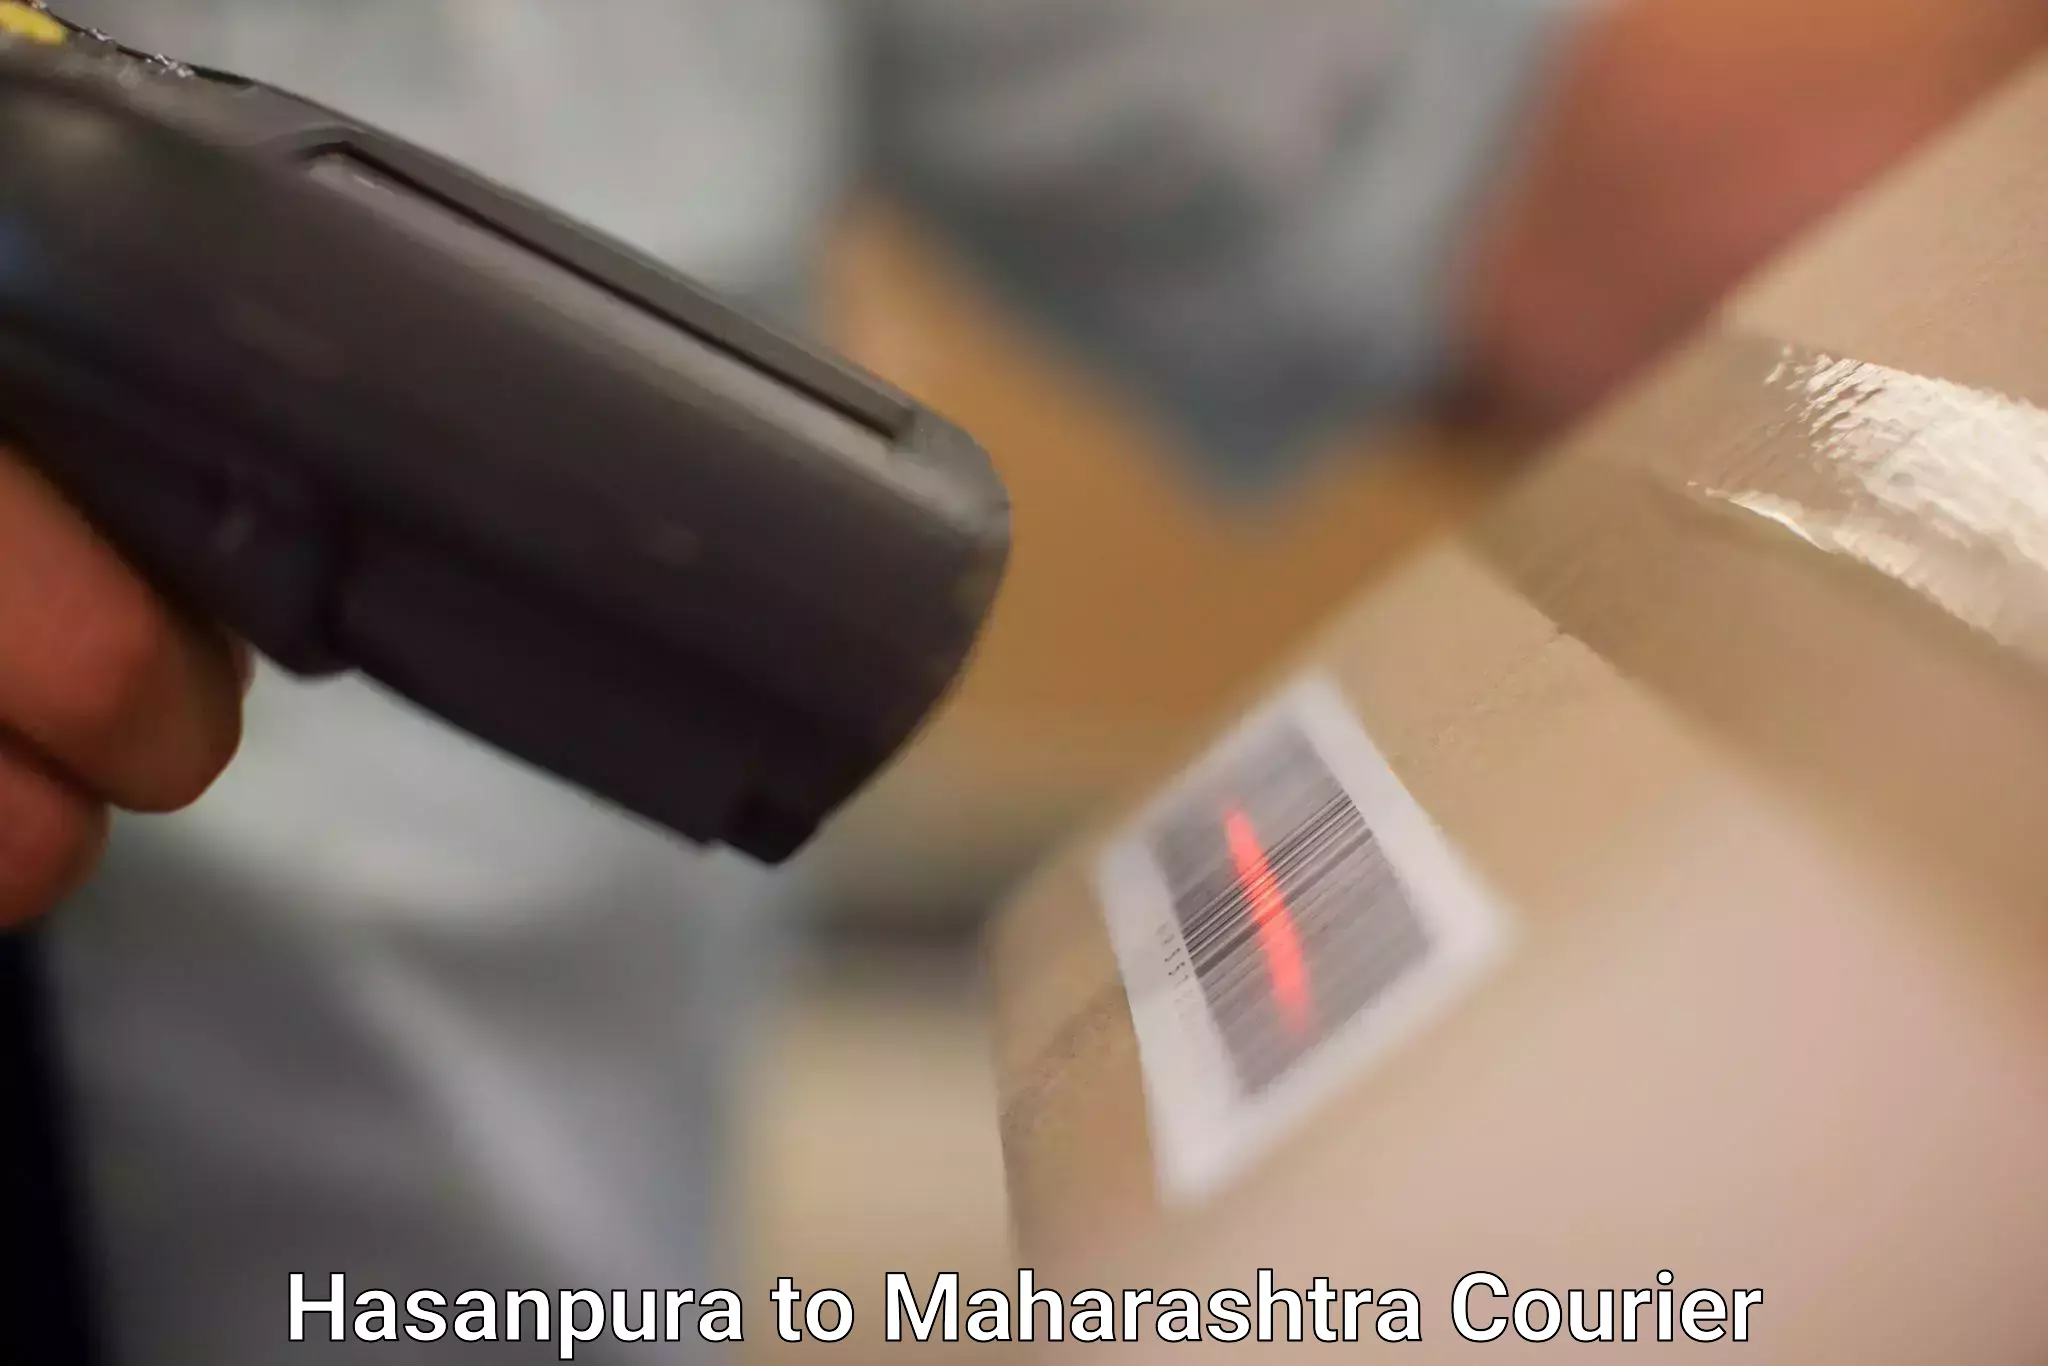 Reliable delivery network Hasanpura to Maharashtra